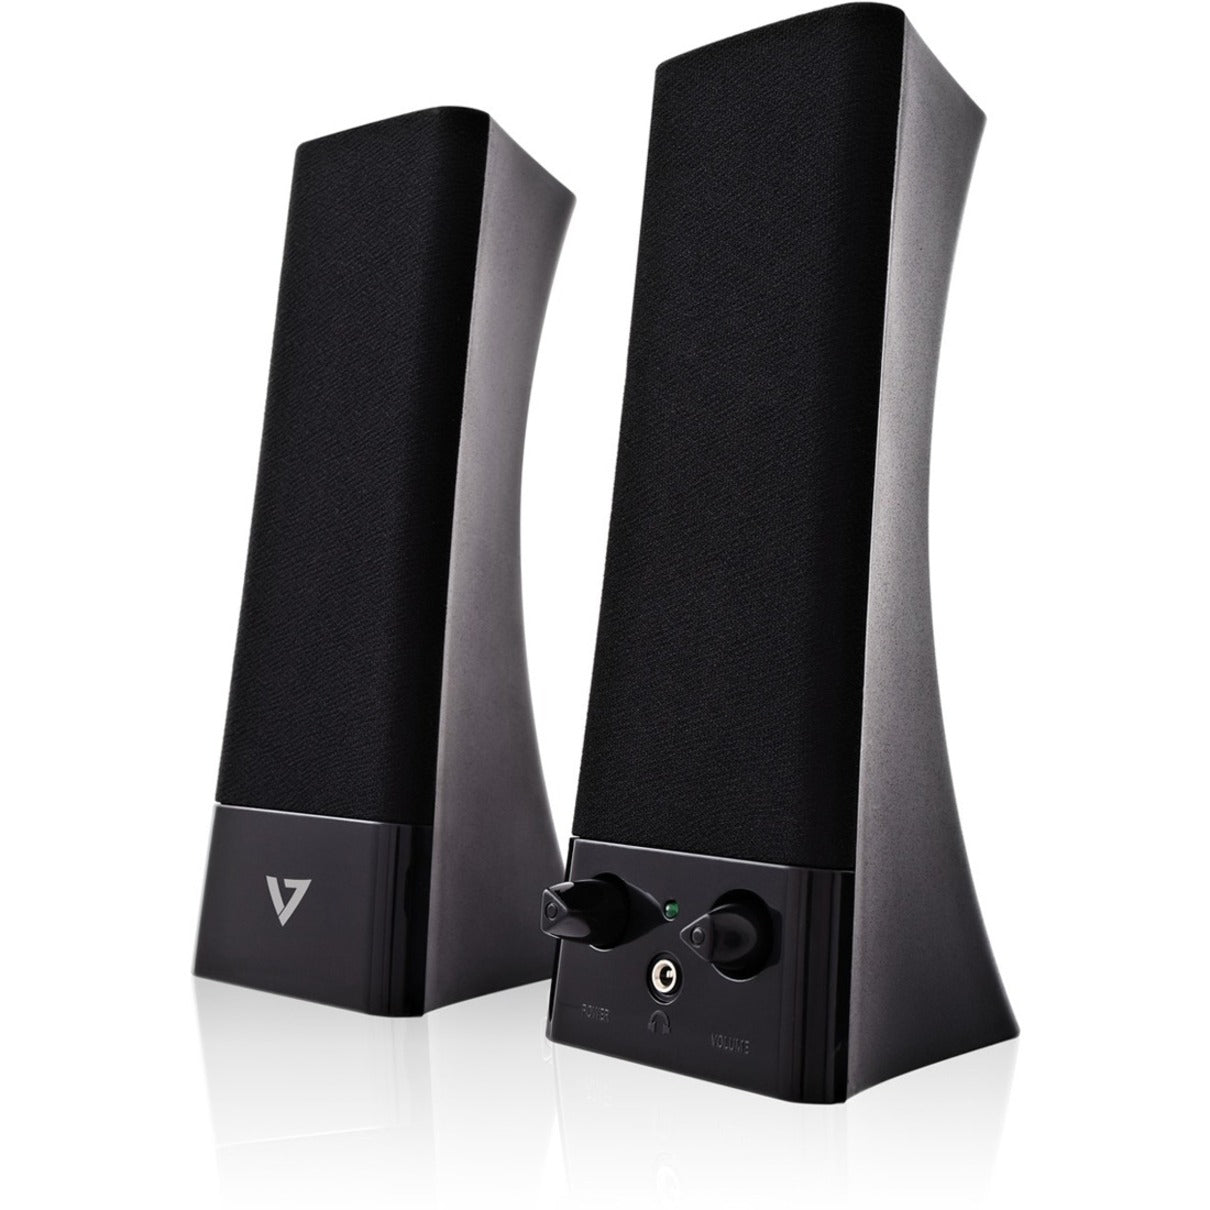 V7 SP2500-USB-6N USB Powered Stereo Speakers, 5W RMS Output Power, 2 Year Warranty, Black